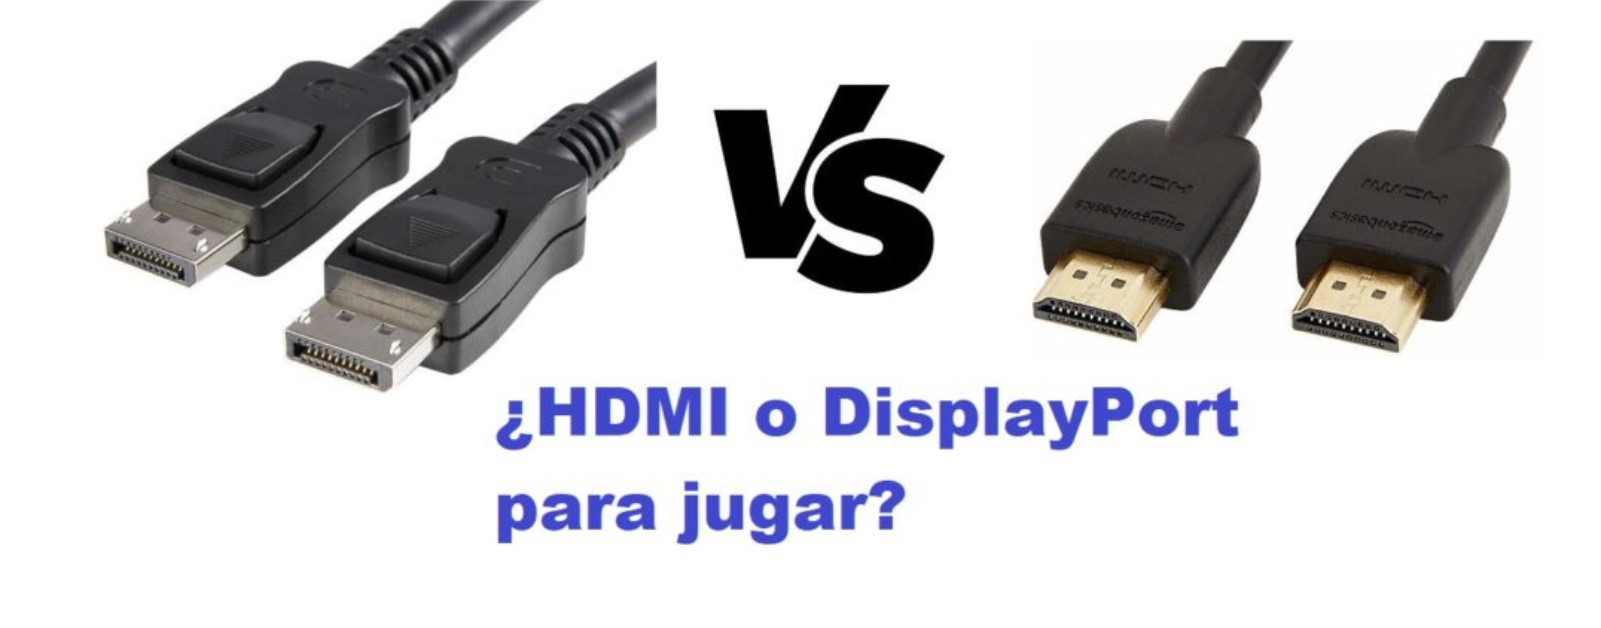 HDMI Or Displayport Which Is Better For Gaming?